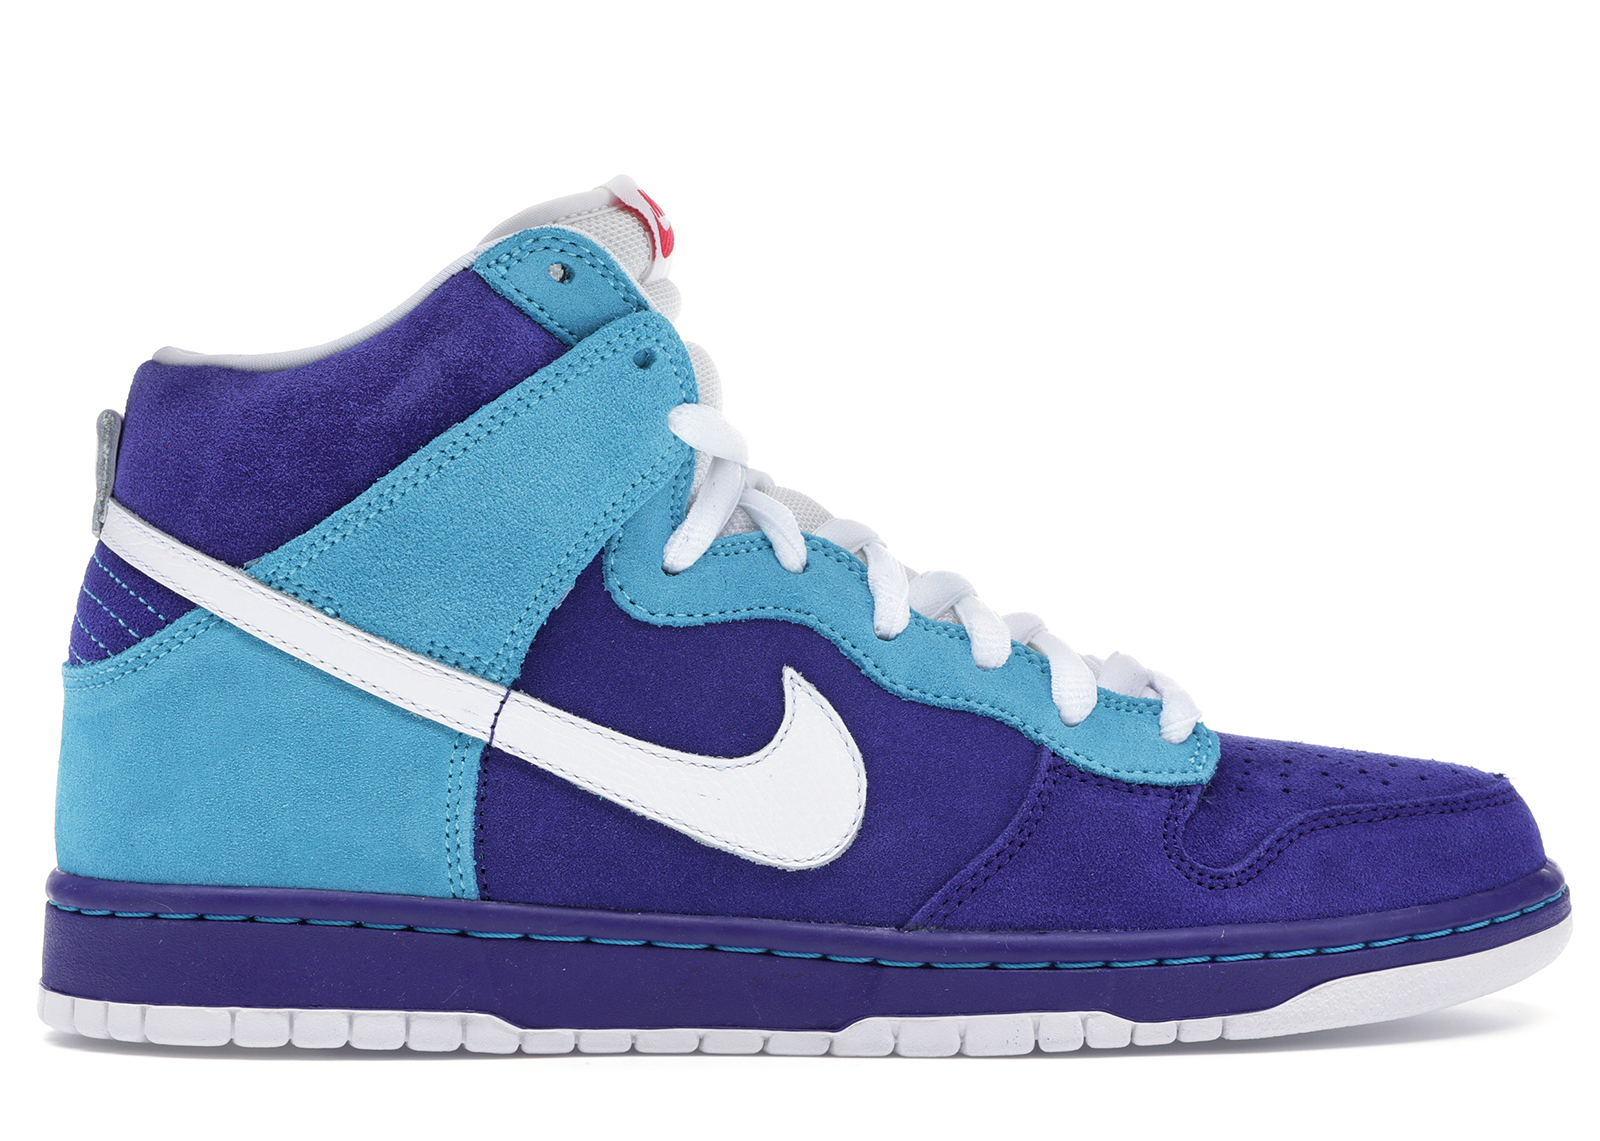 Nike Dunk SB High Oceanic Airlines 